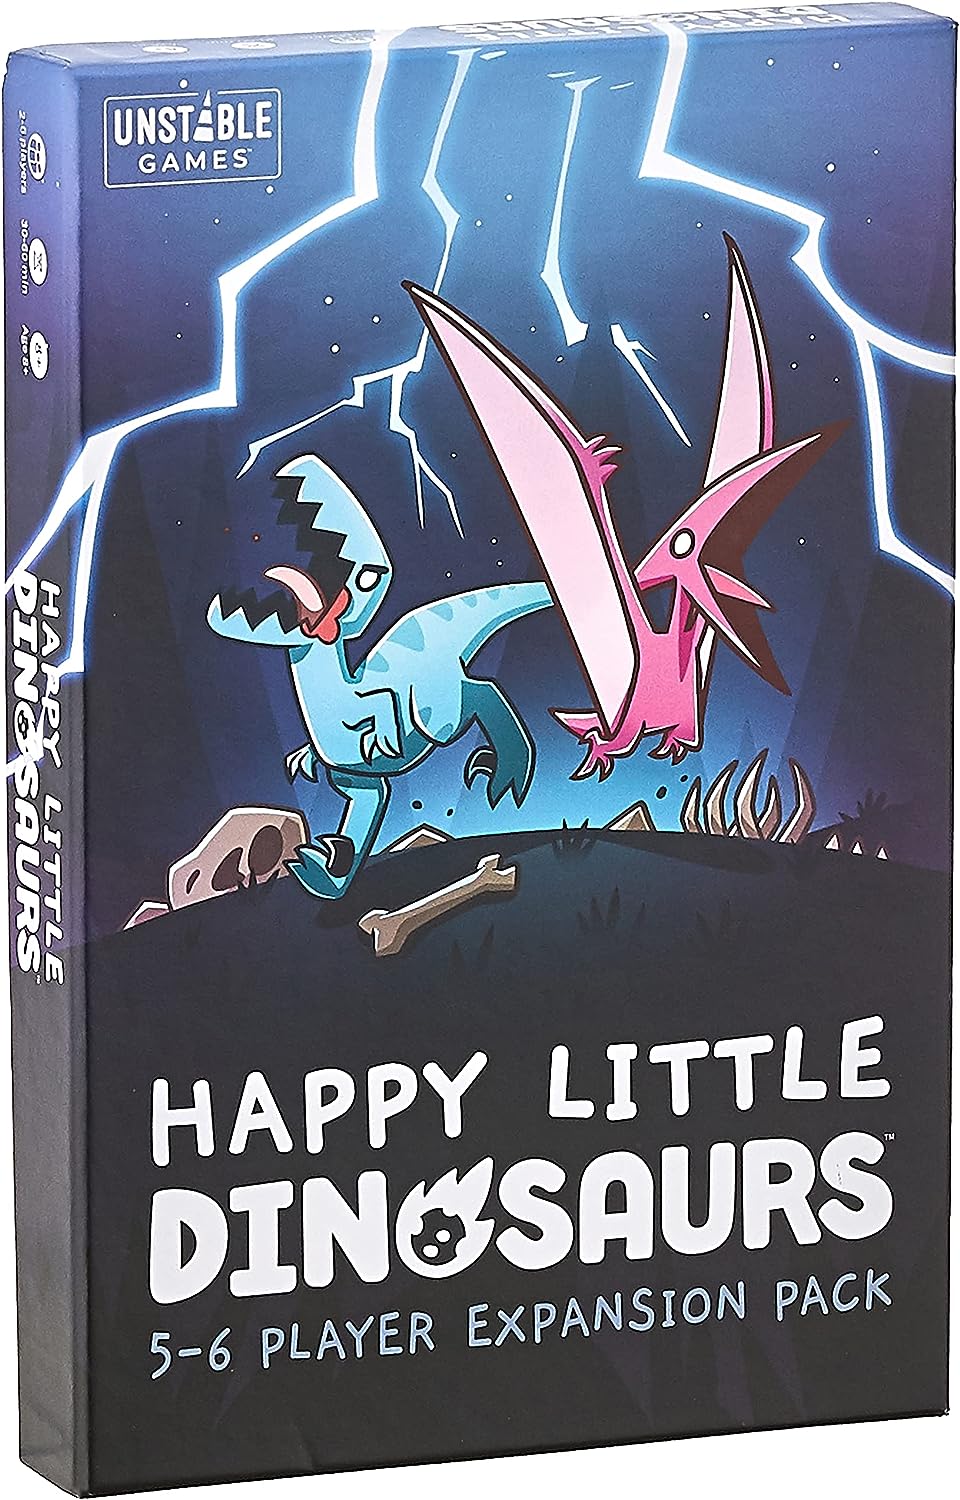 (BSG Certified USED) Happy Little Dinosaurs - 5-6 Player Expansion